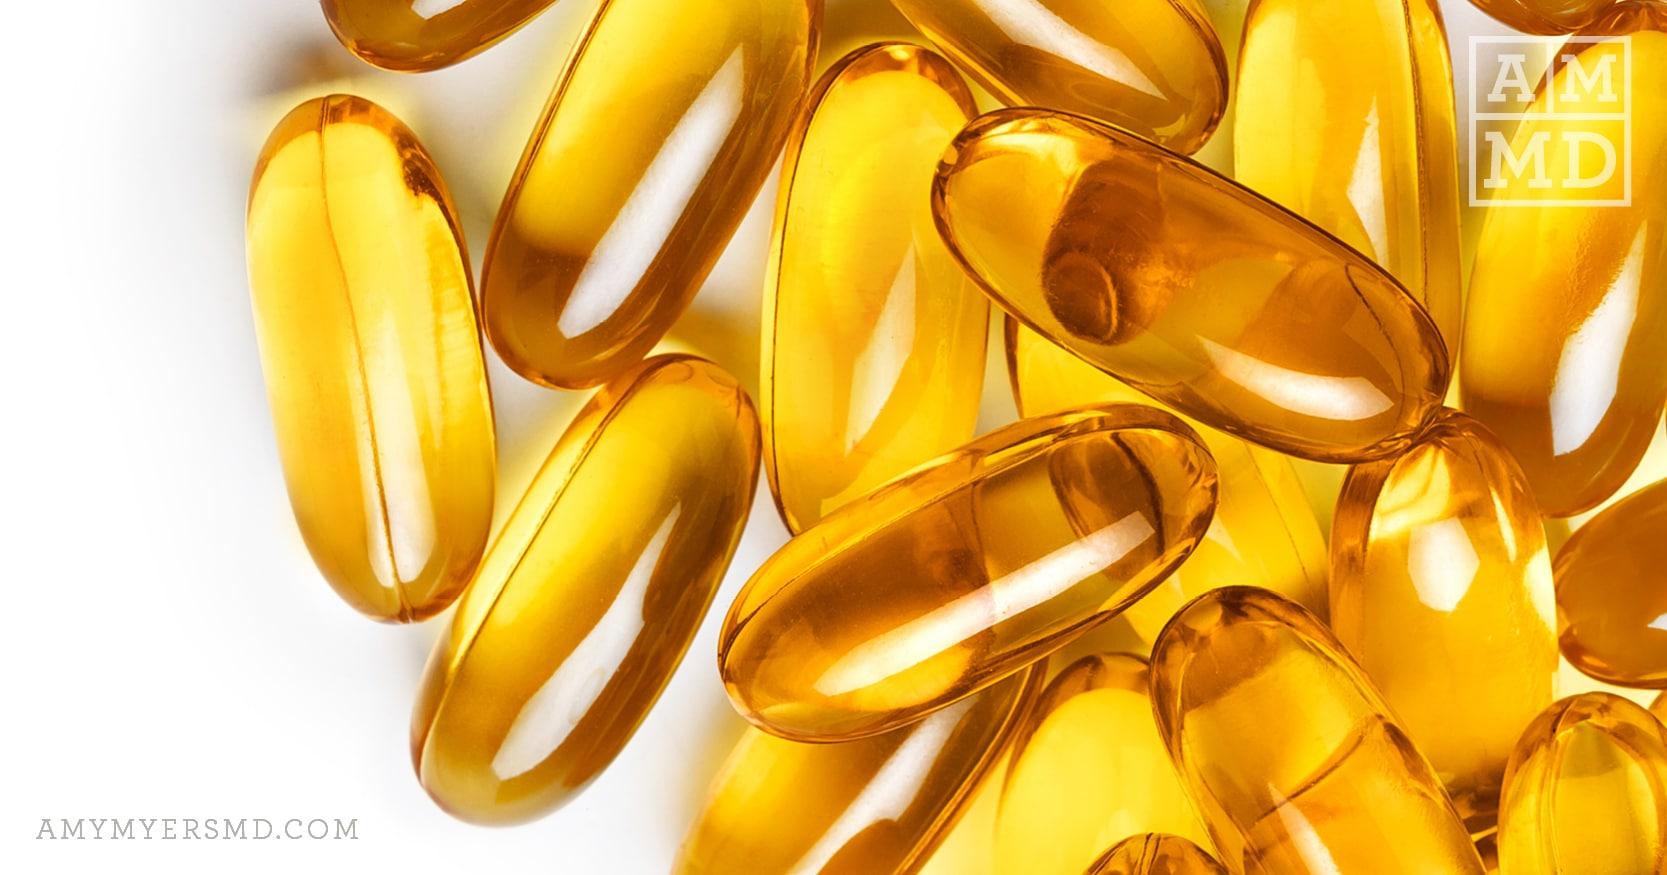 4 Top Autoimmune Supplements My Patients Take - Omega-3 Softgel Tablets - Featured Image